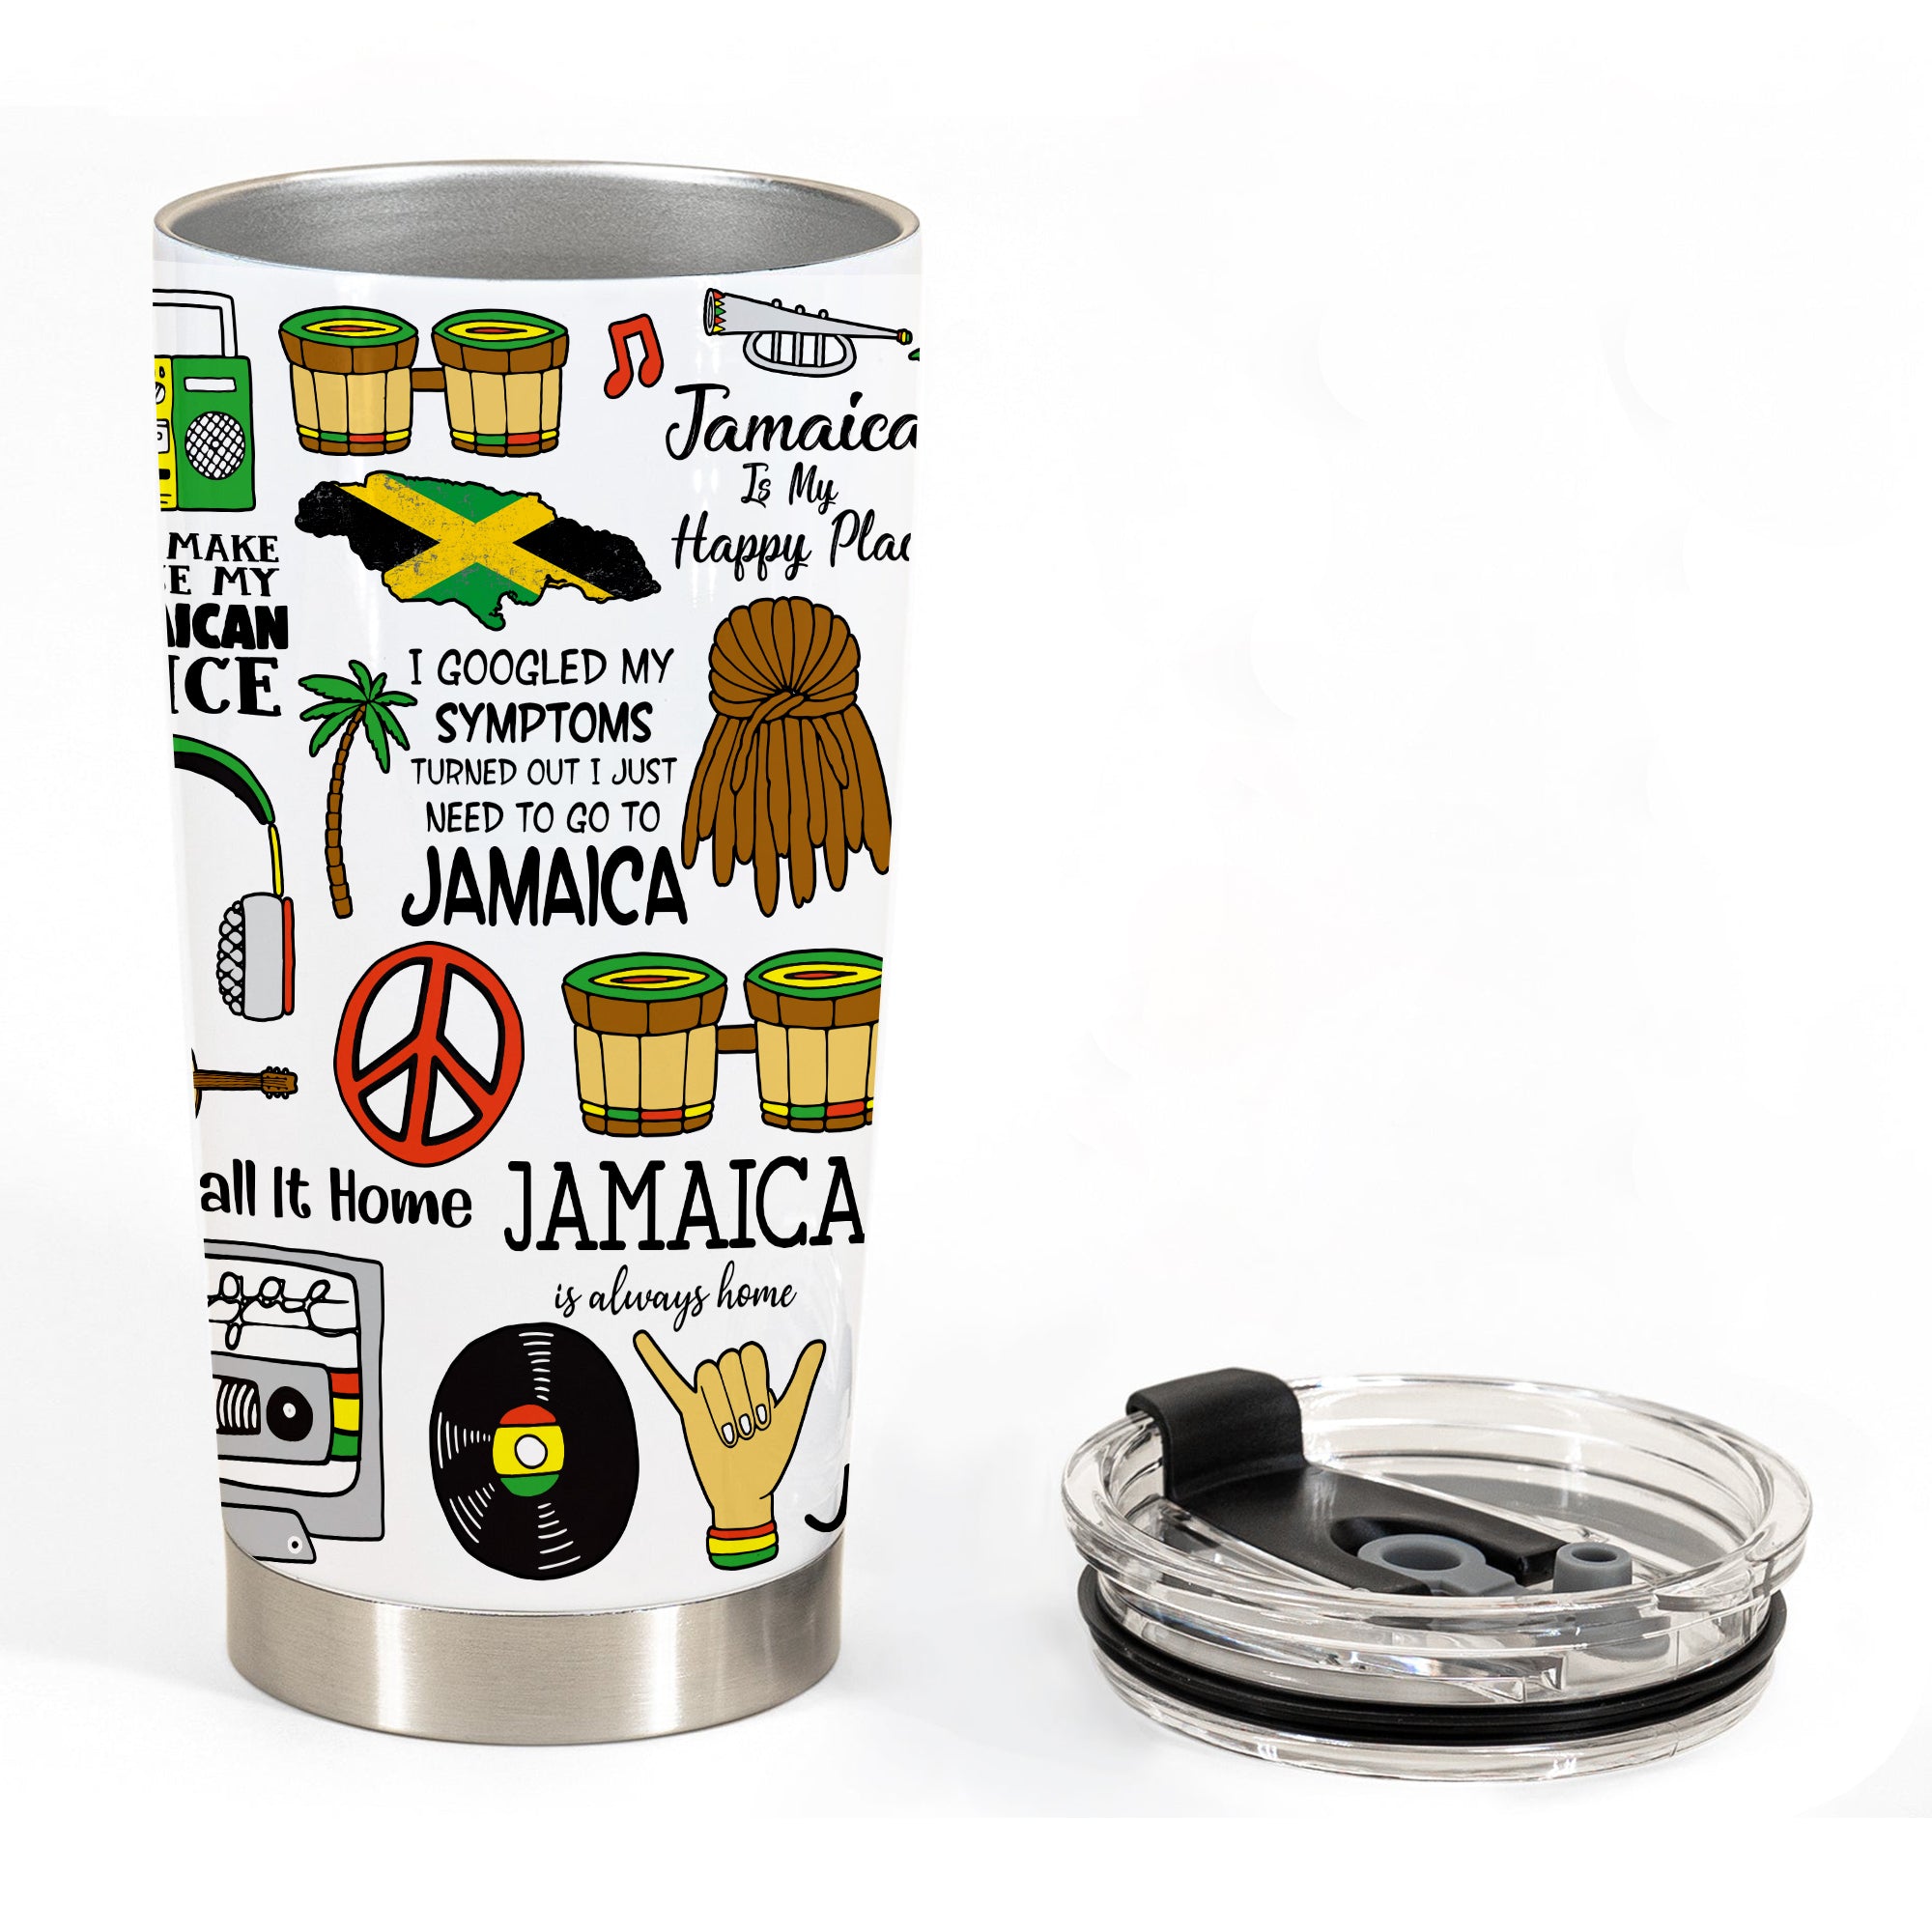 Jamaica Tumbler With Saying And Symbols